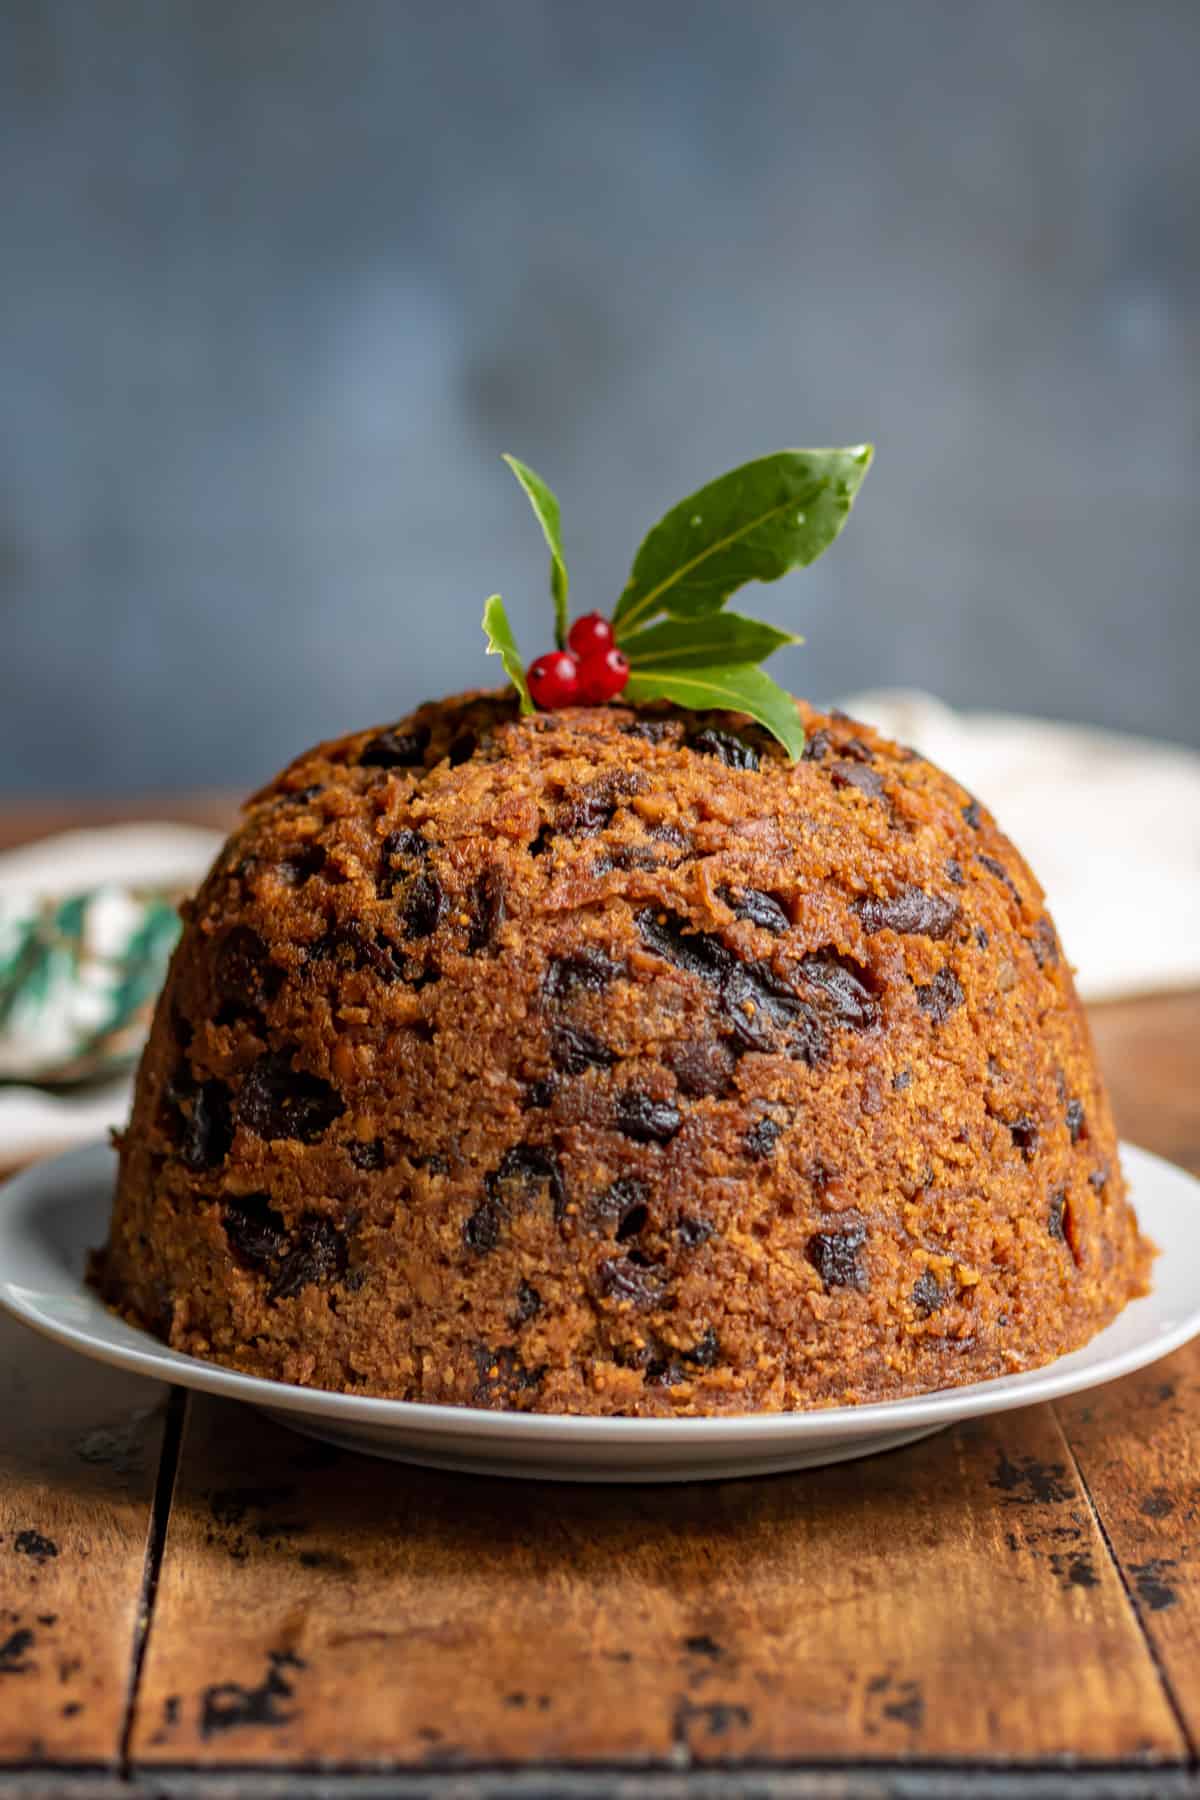 Table with a figgy pudding on a plate.